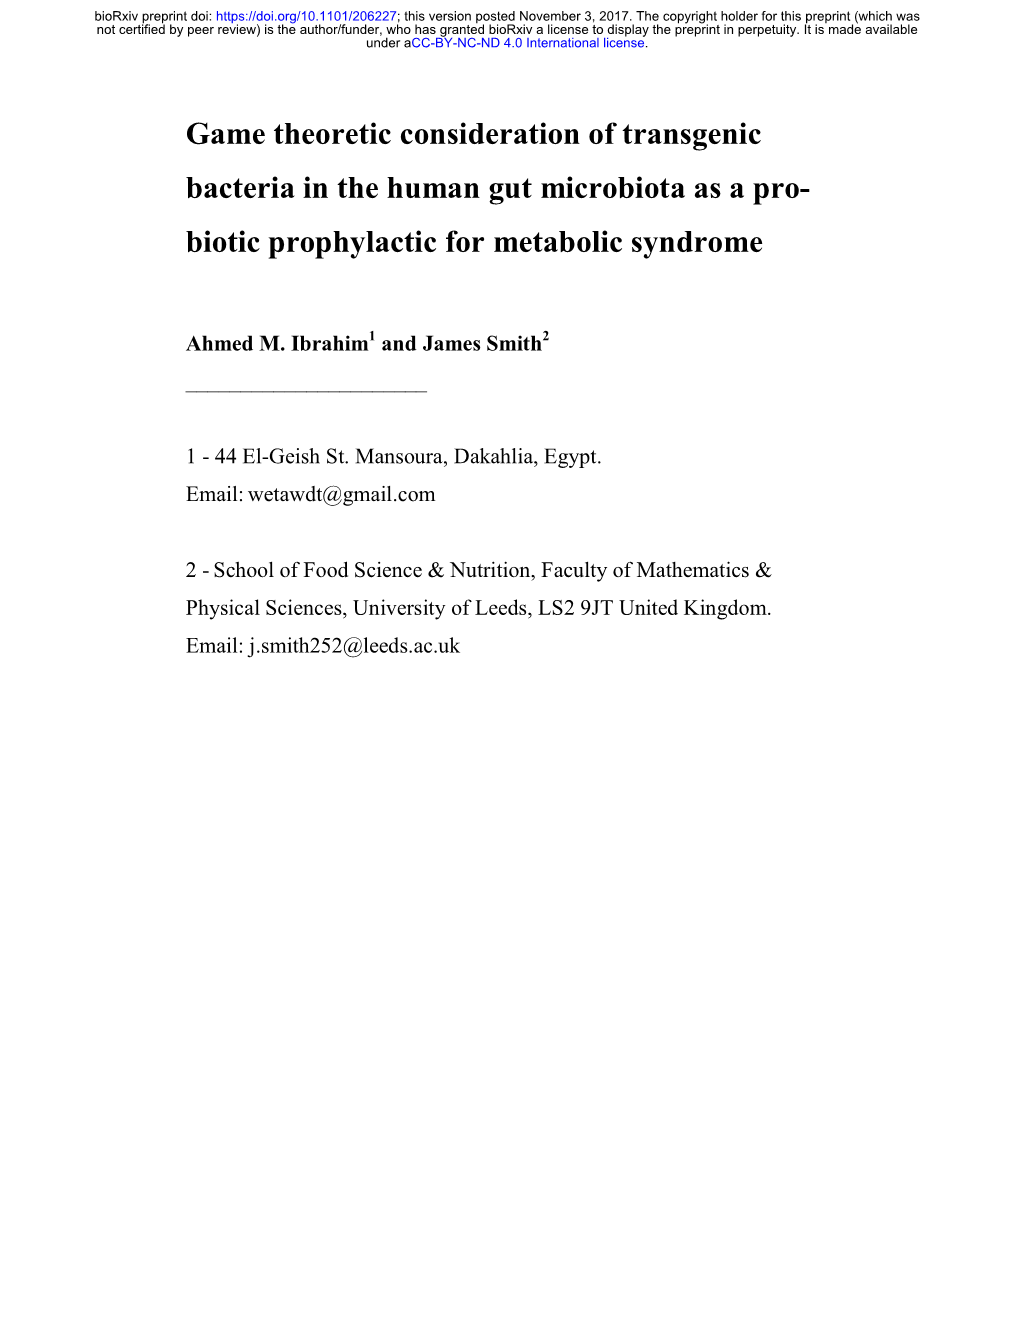 Game Theoretic Consideration of Transgenic Bacteria in the Human Gut Microbiota As a Pro- Biotic Prophylactic for Metabolic Syndrome